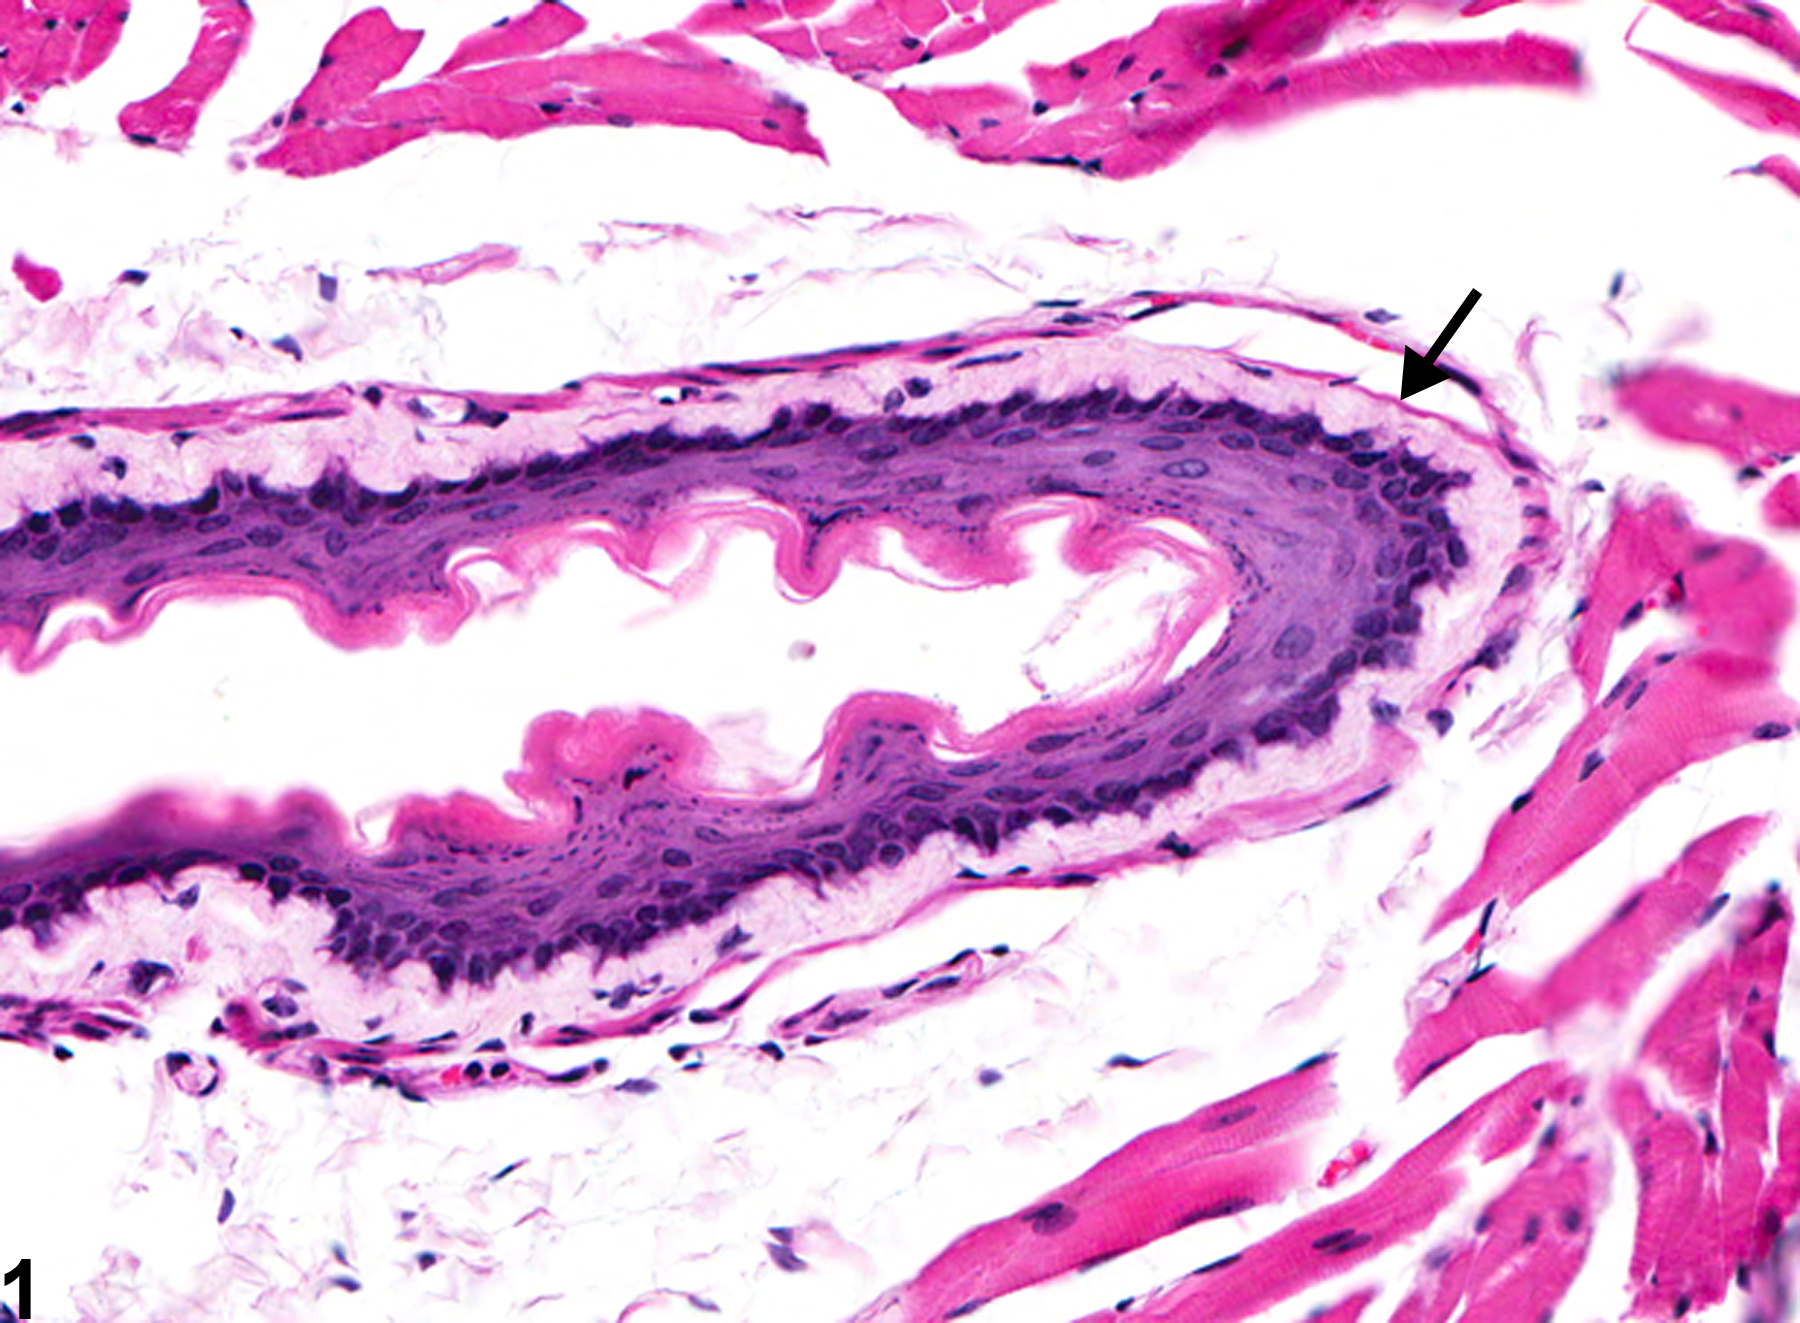 Image of amyloid in the esophagus from a male Swiss Webster mouse in a chronic study